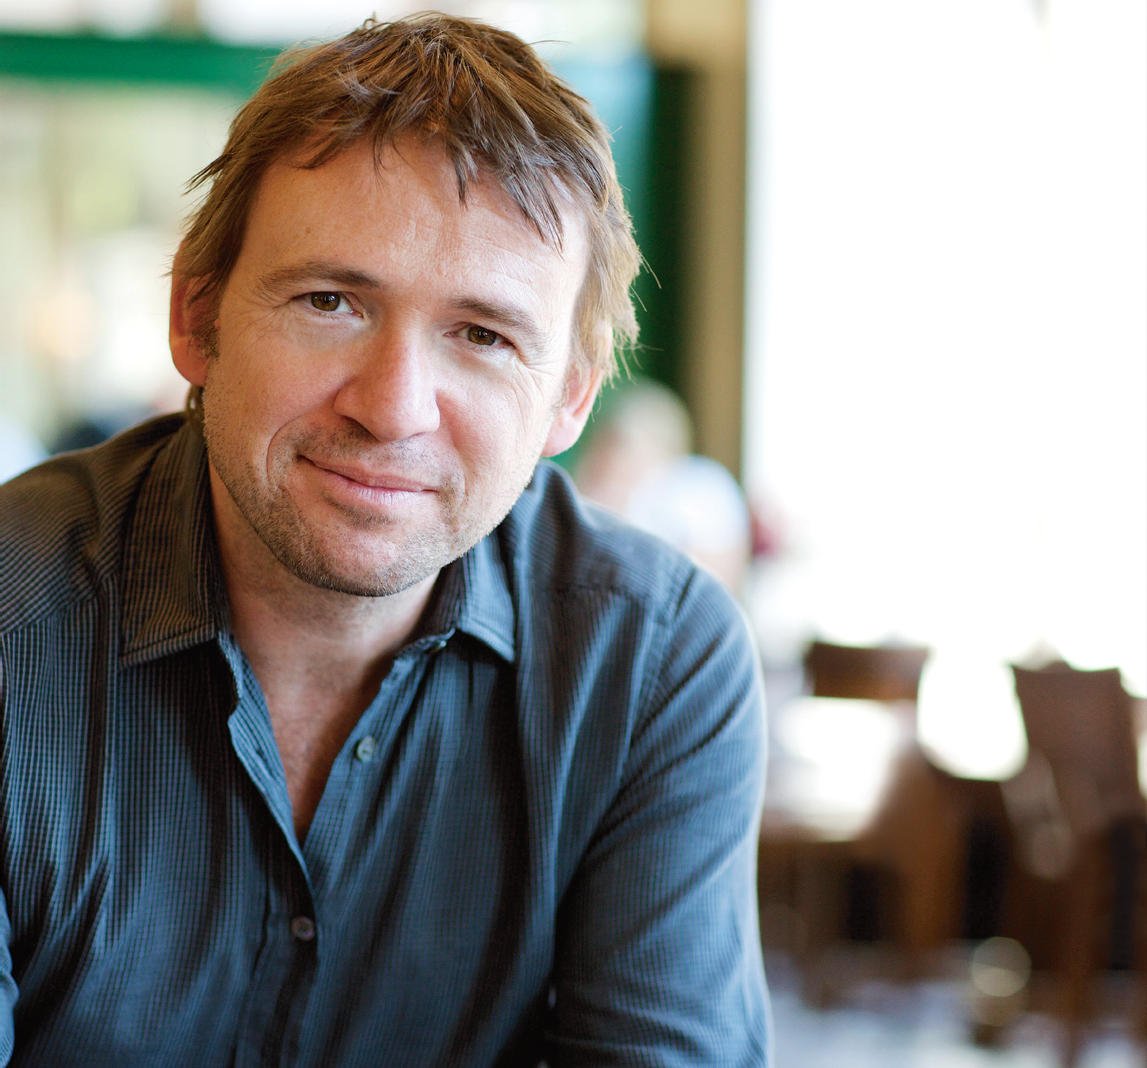 Author David Nicholls talks to Chatelaine about his bestselling novel turned movie, One Day